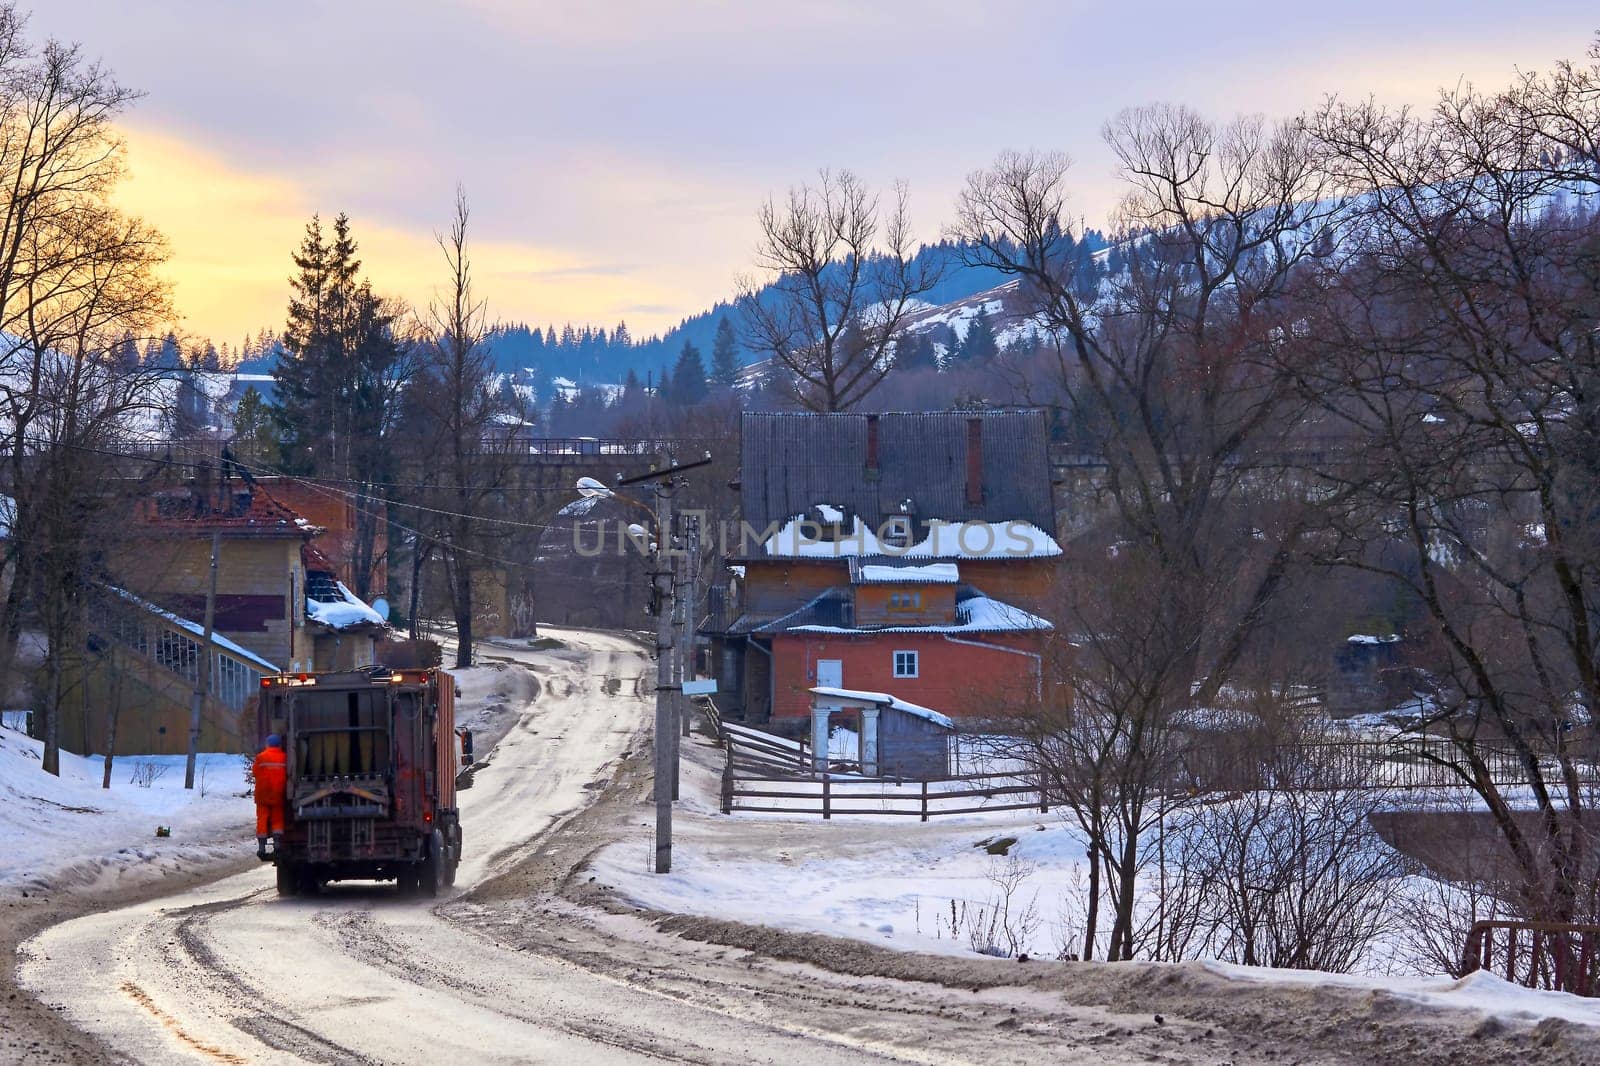 A truck collecting garbage drives through an evening winter town by jovani68